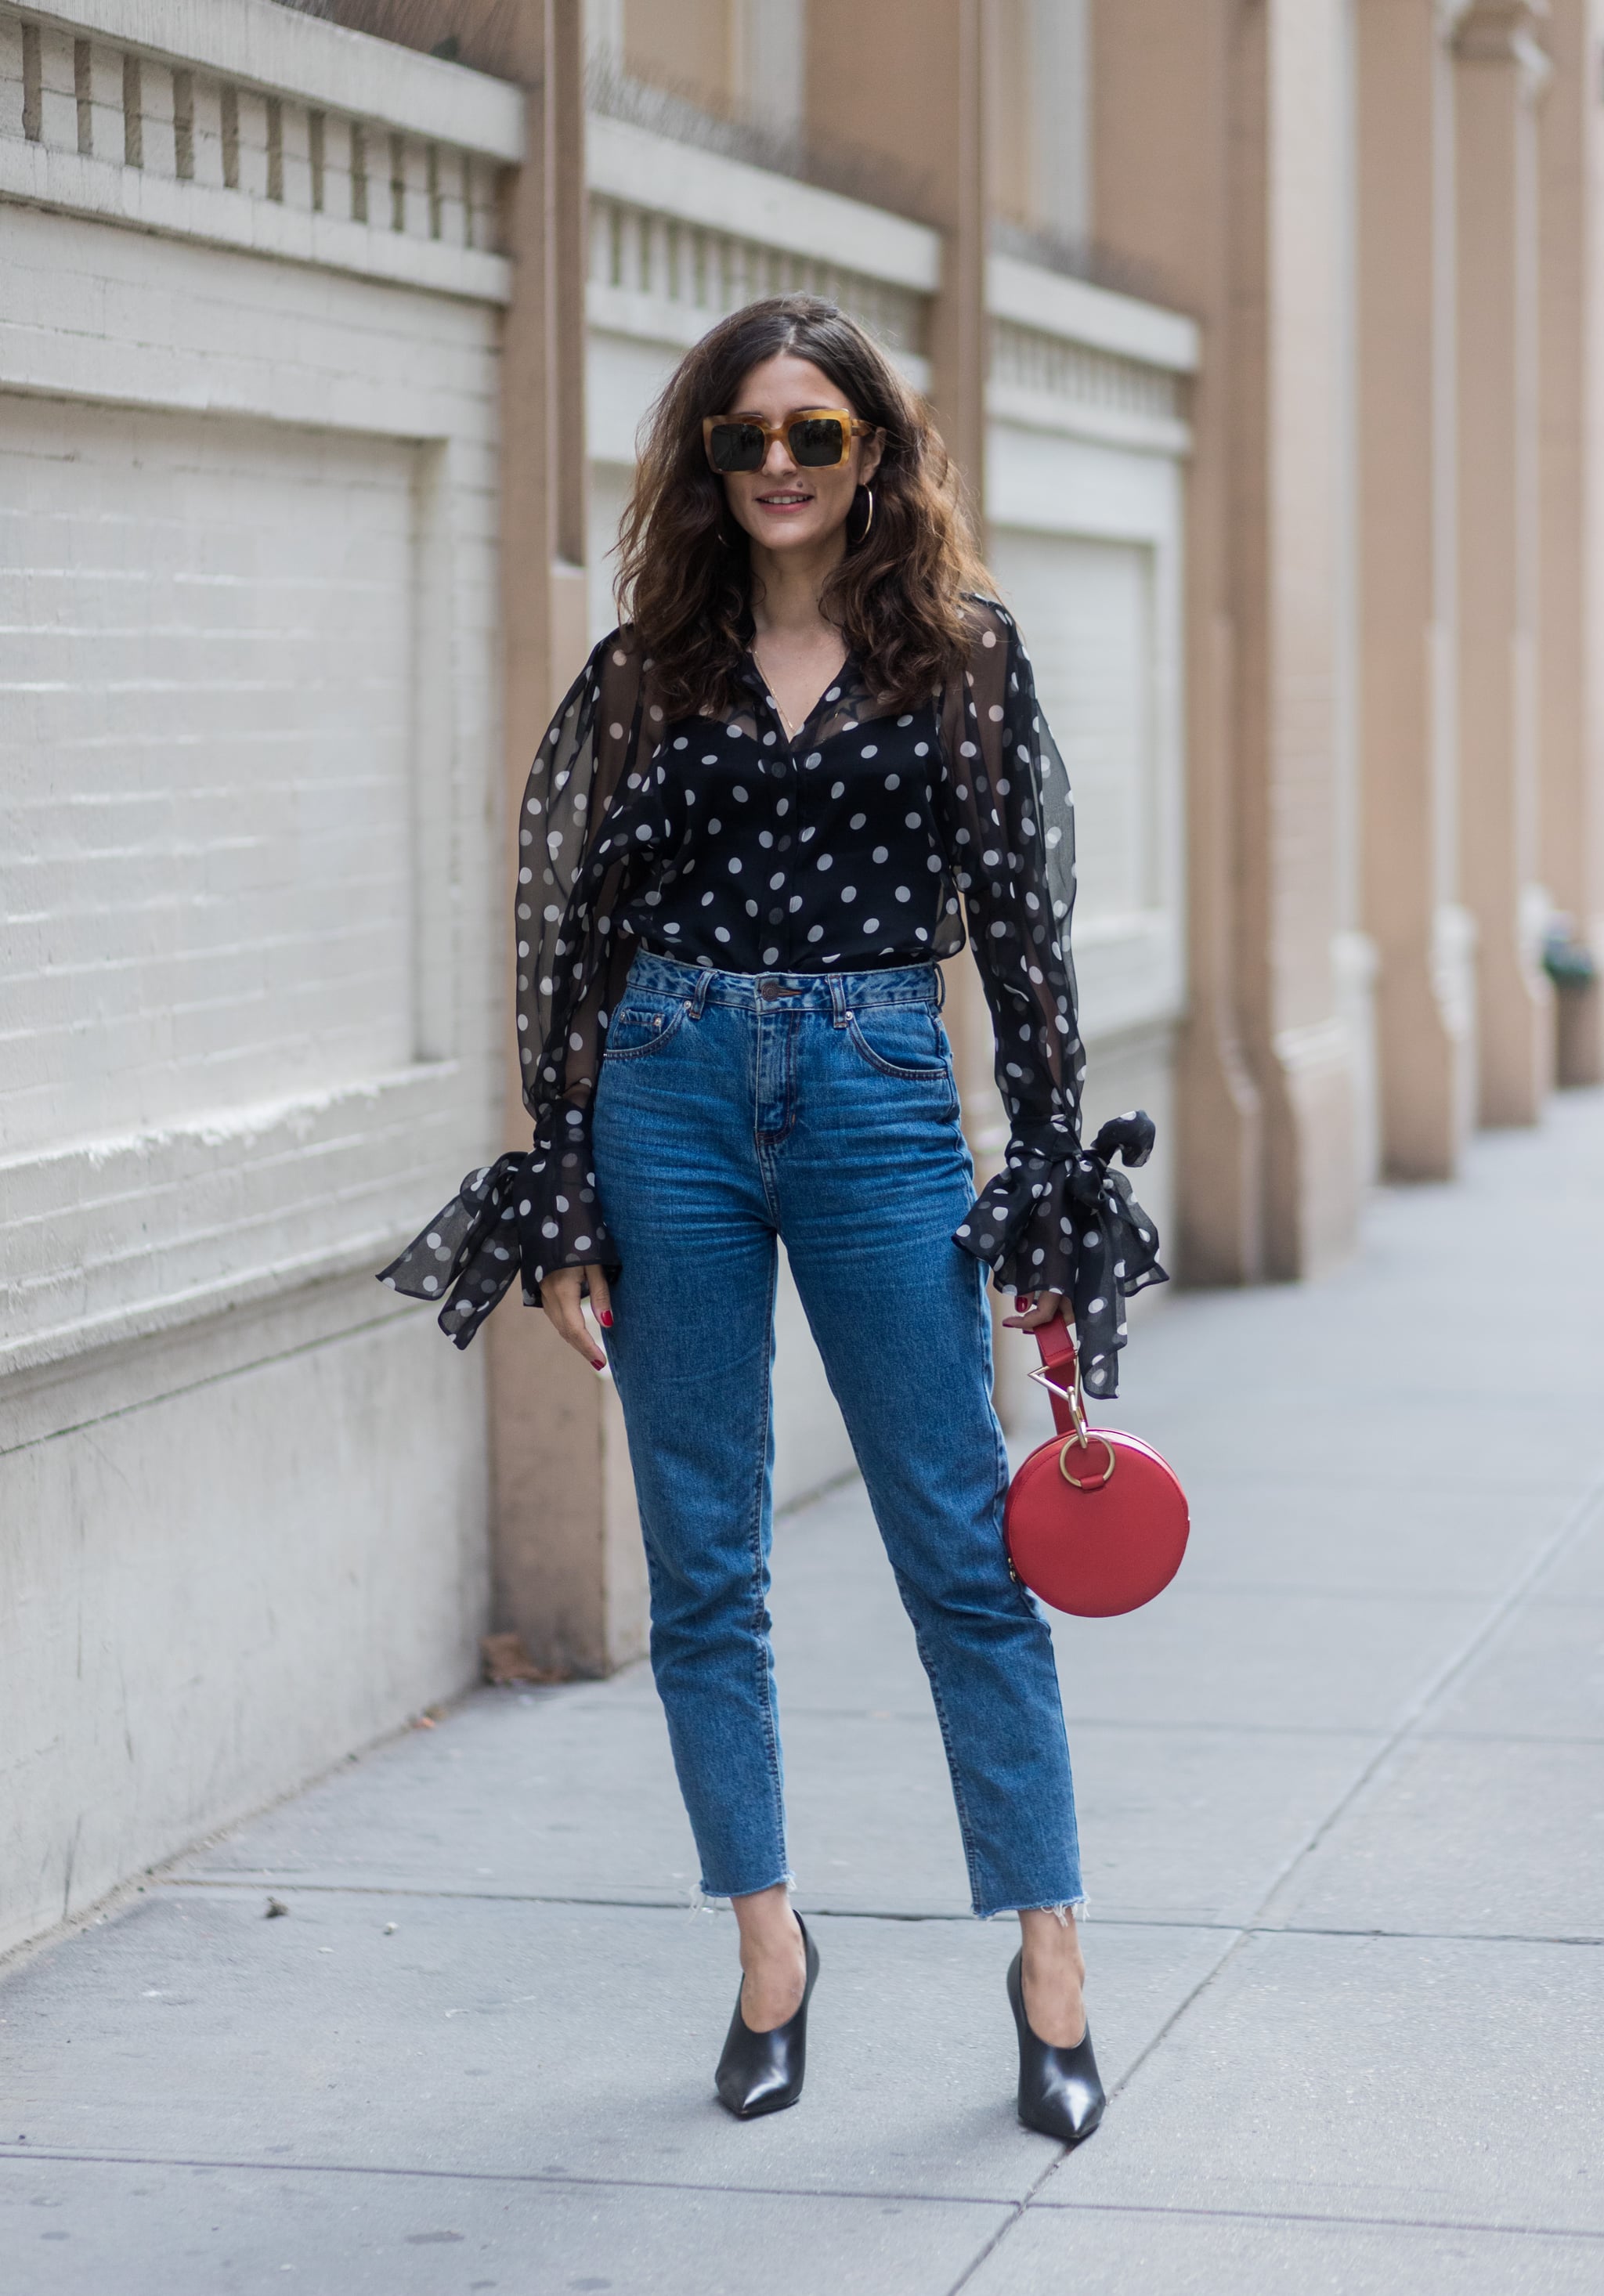 A Polka Dot Shirt, A Casual Summer Outfit and Trying Things Out